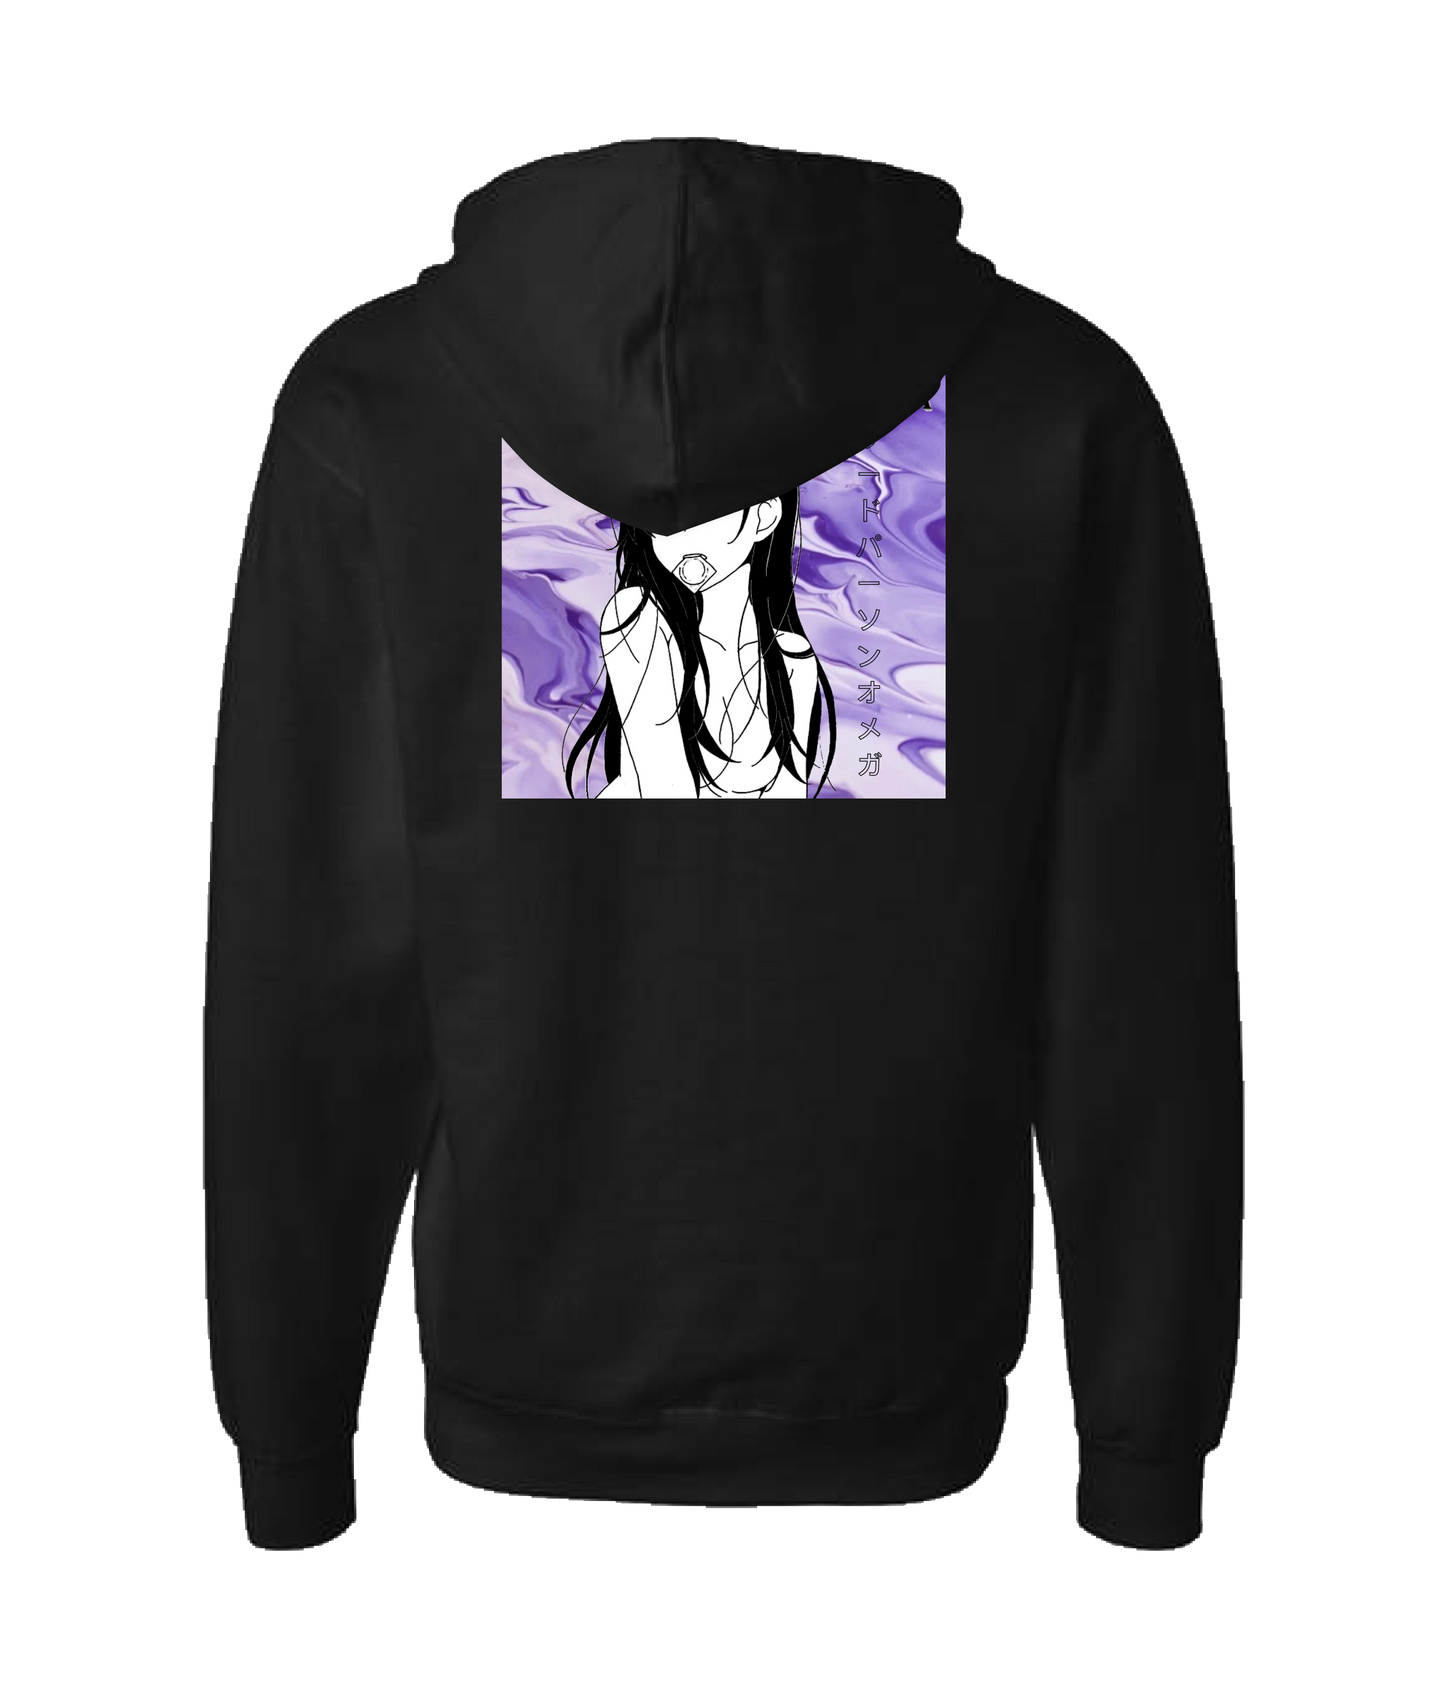 Third Person Omega - ANIME GIRL - Black Zip Up Hoodie